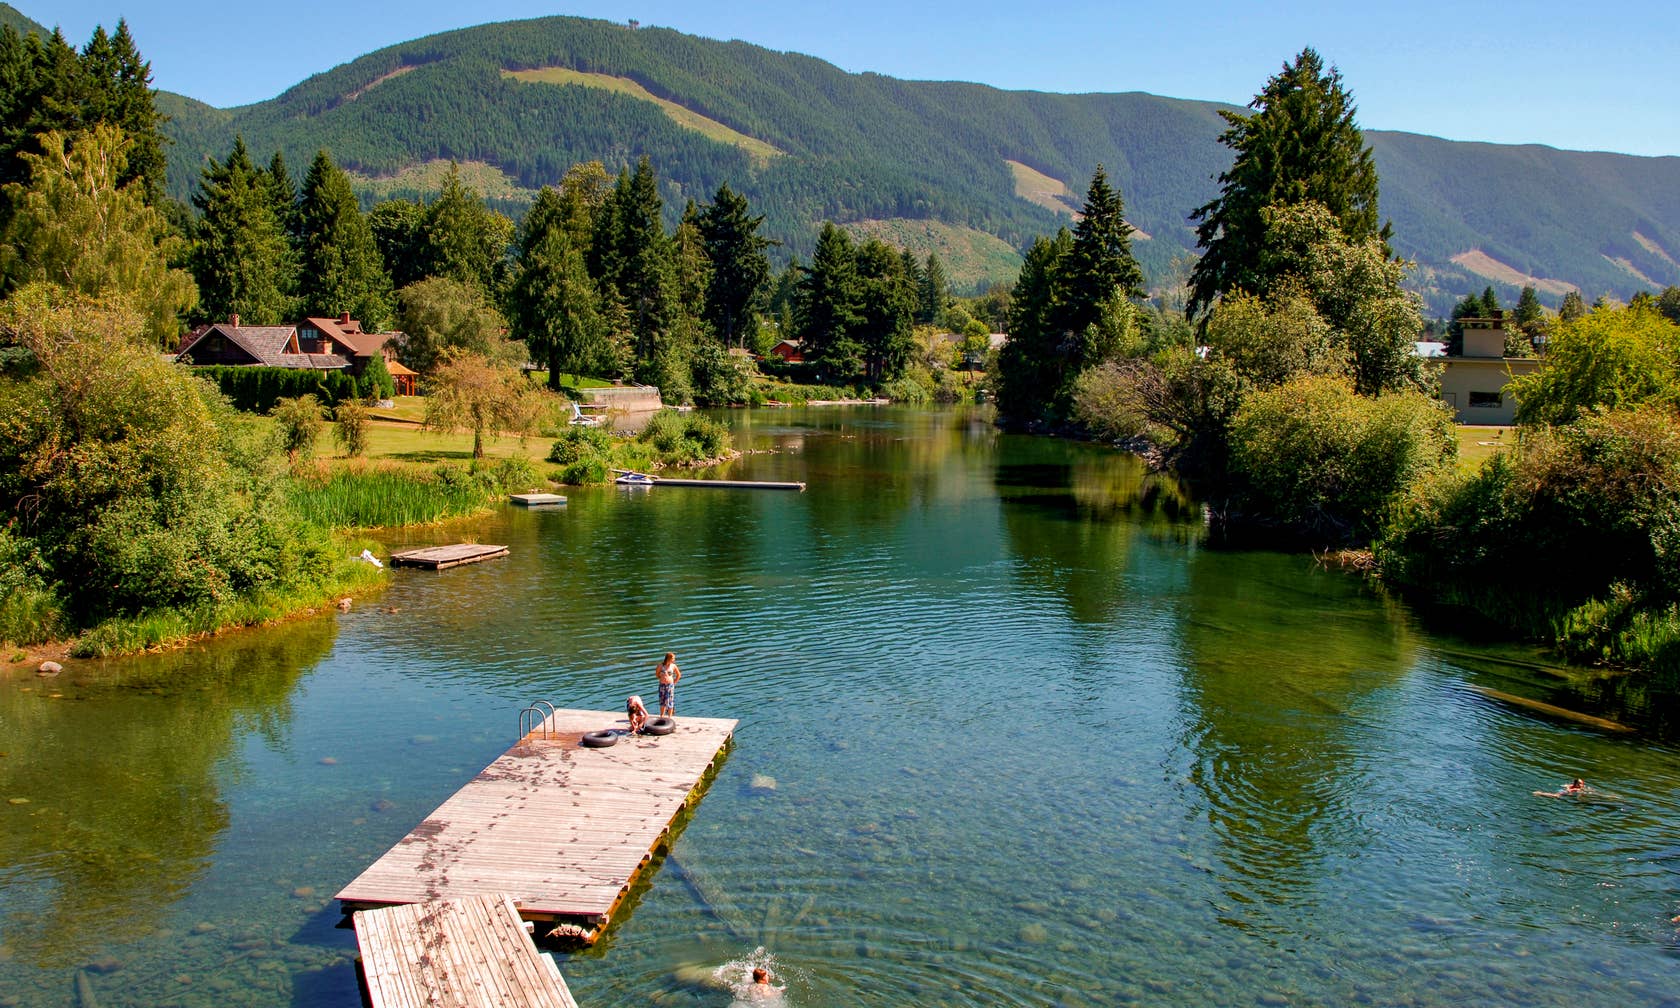 Vacation rentals in Lake Cowichan